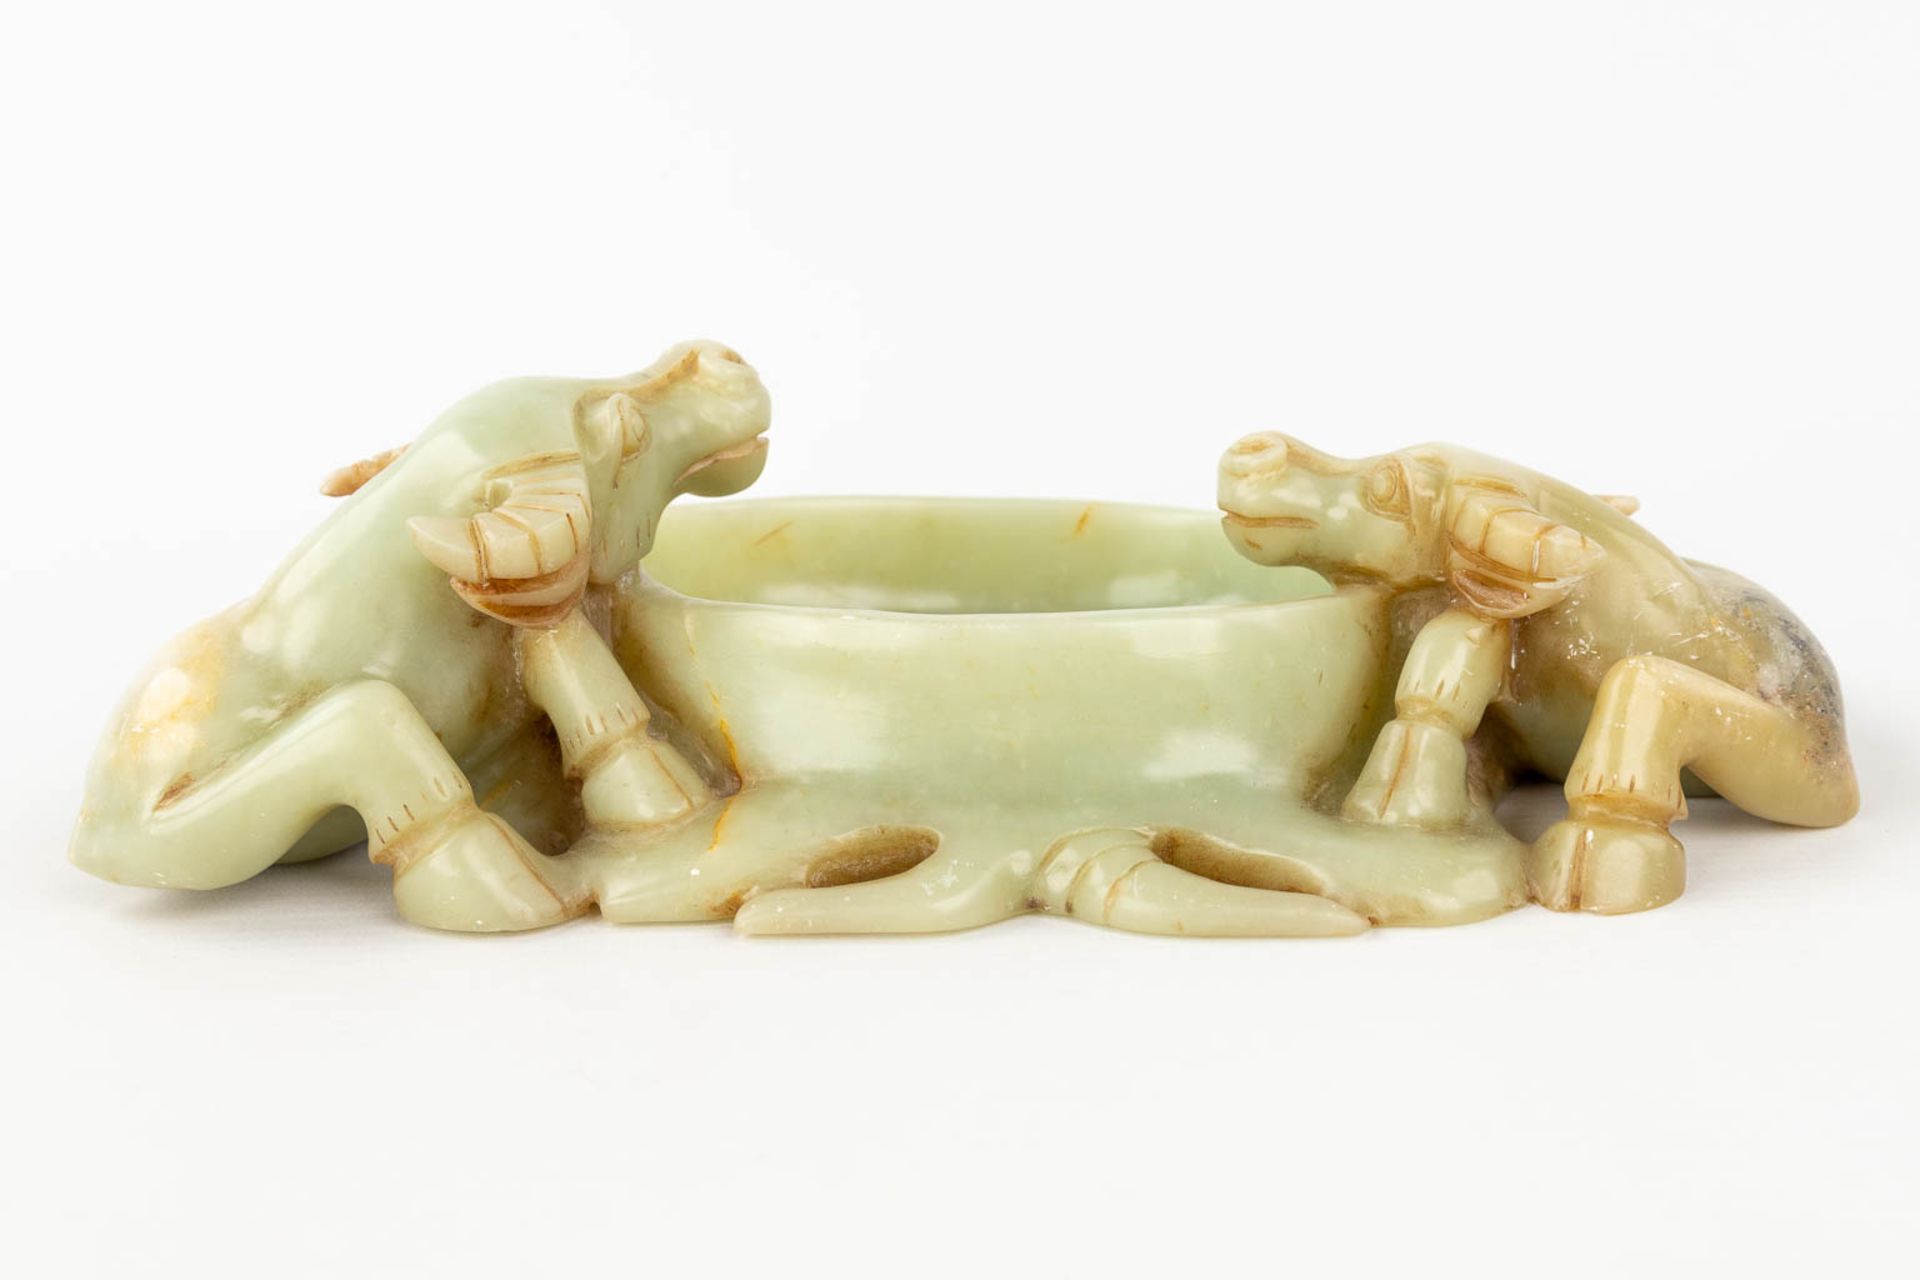 A Chinese brush washer, decorated with water buffalo, sculptured jade. (L: 18 x W: 28 x H: 8 cm) - Image 6 of 10